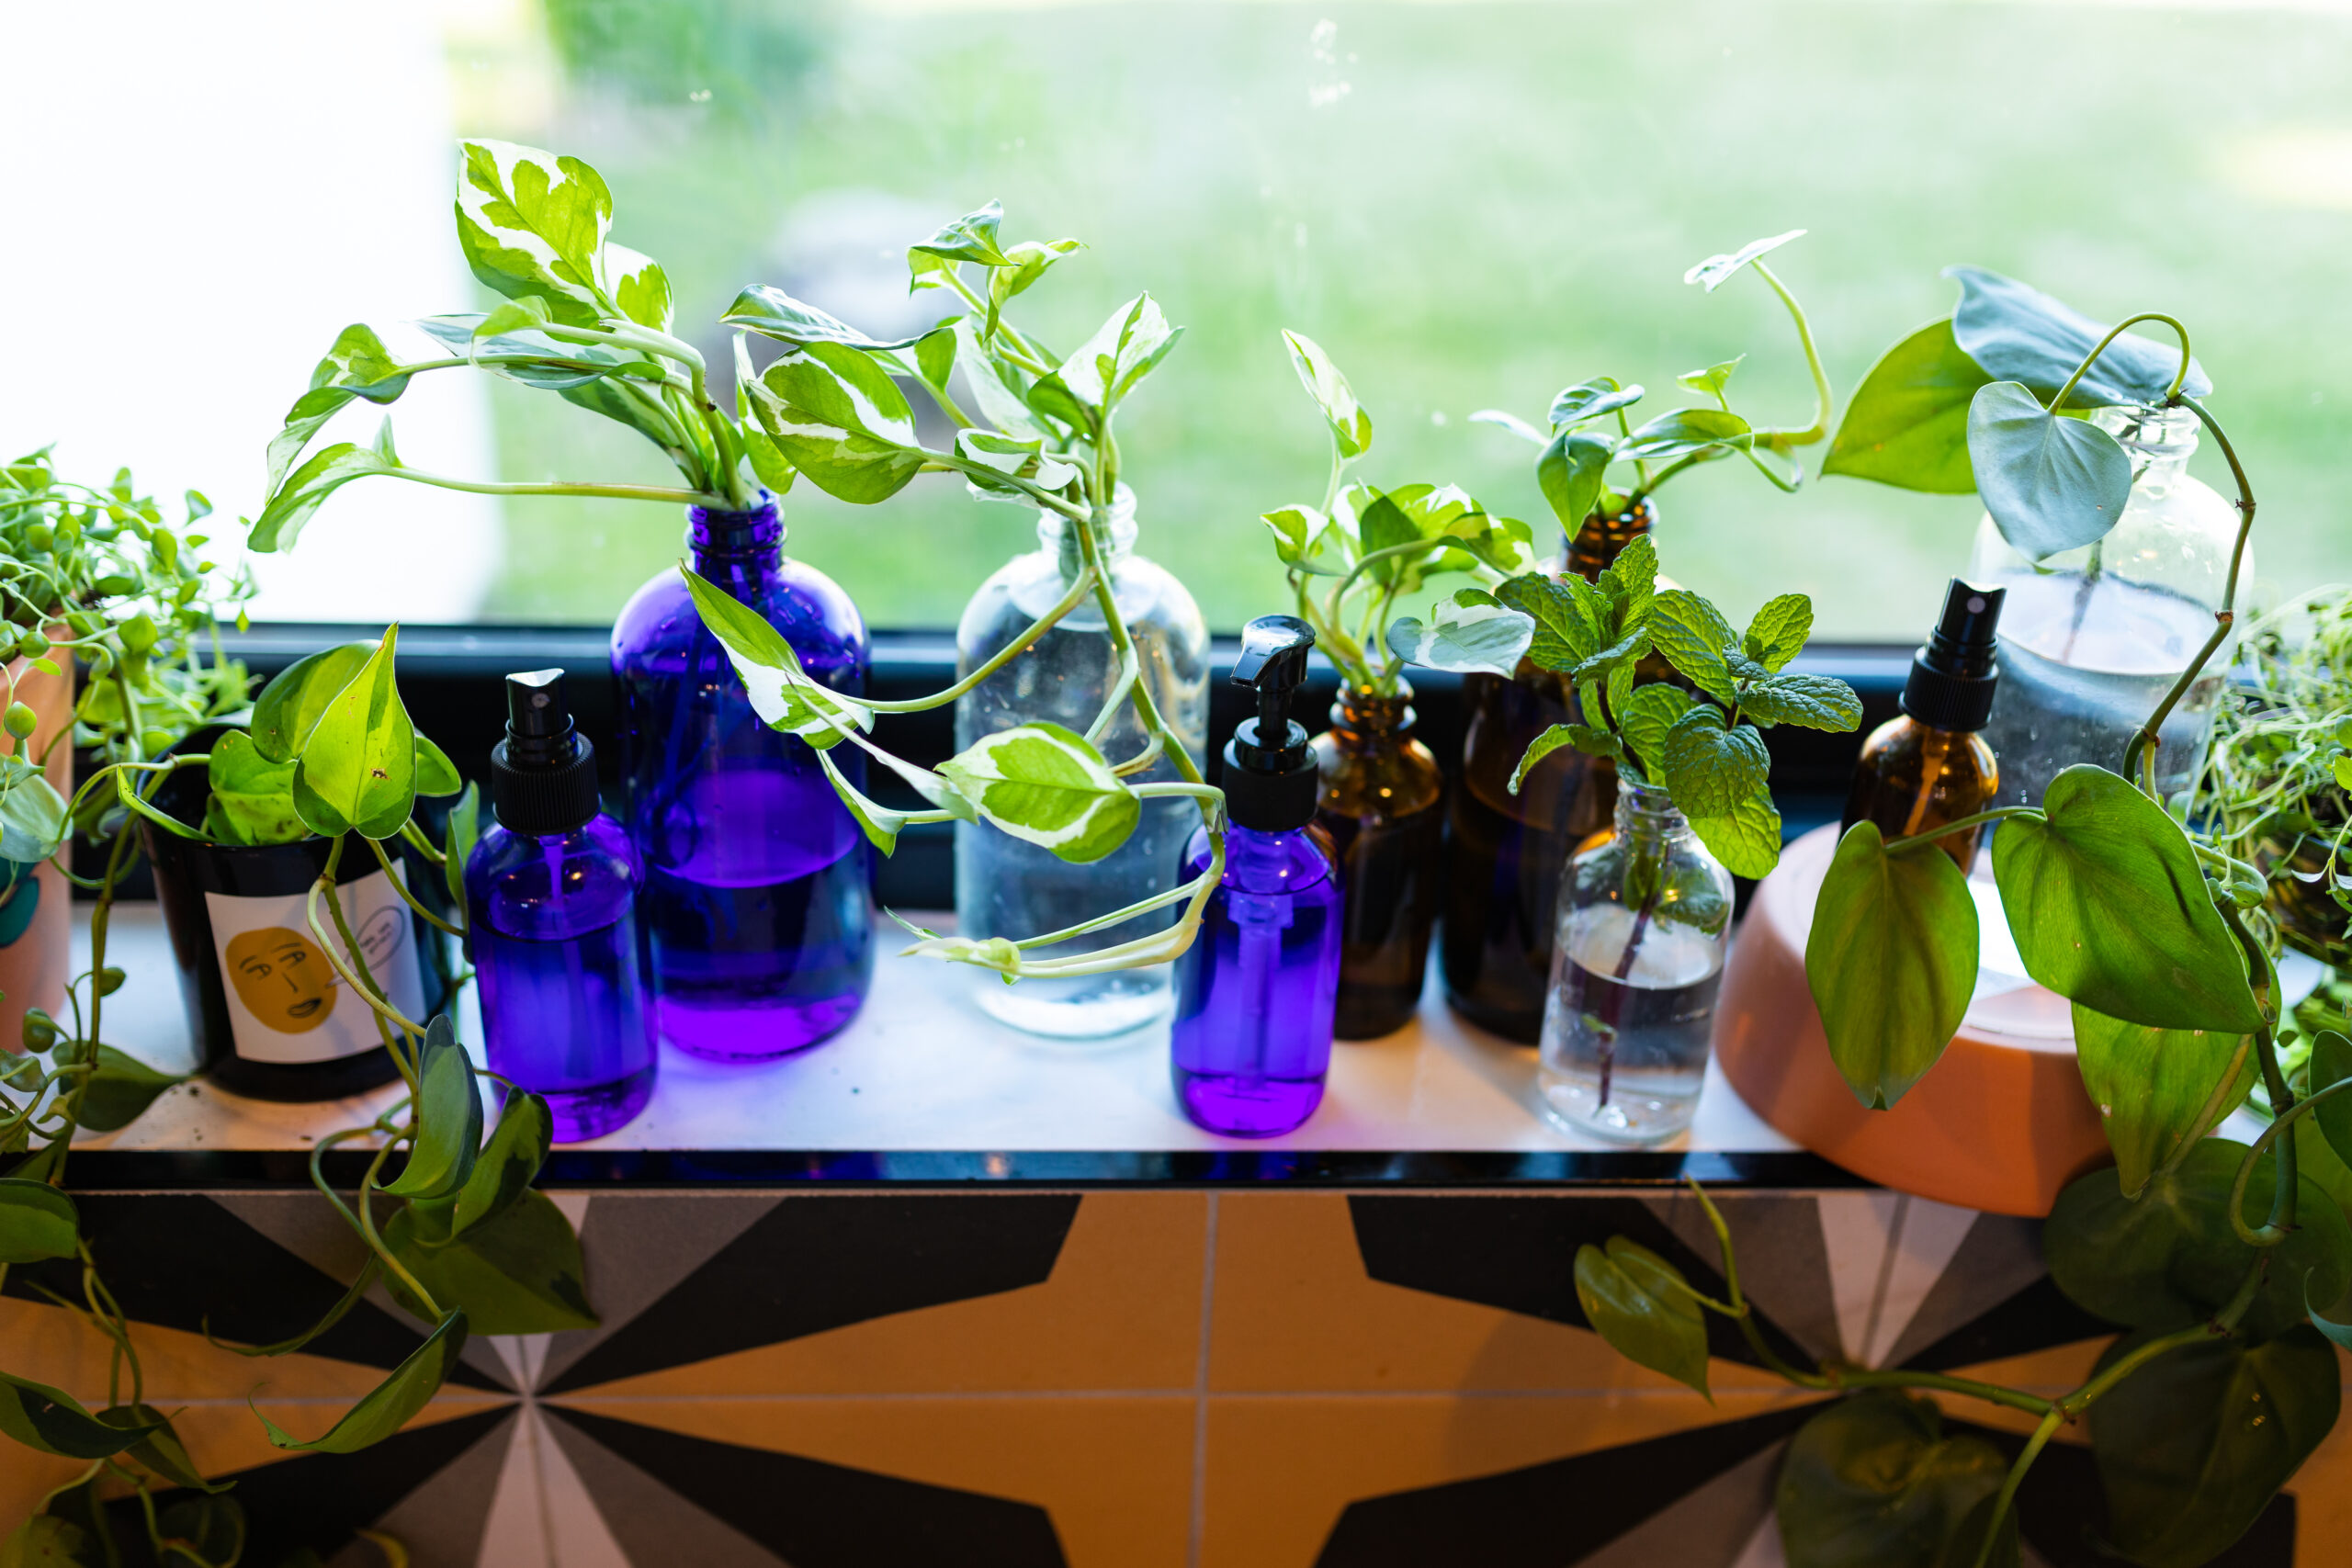 propogation-station-plant-clippings-repurposed-glass-bottles